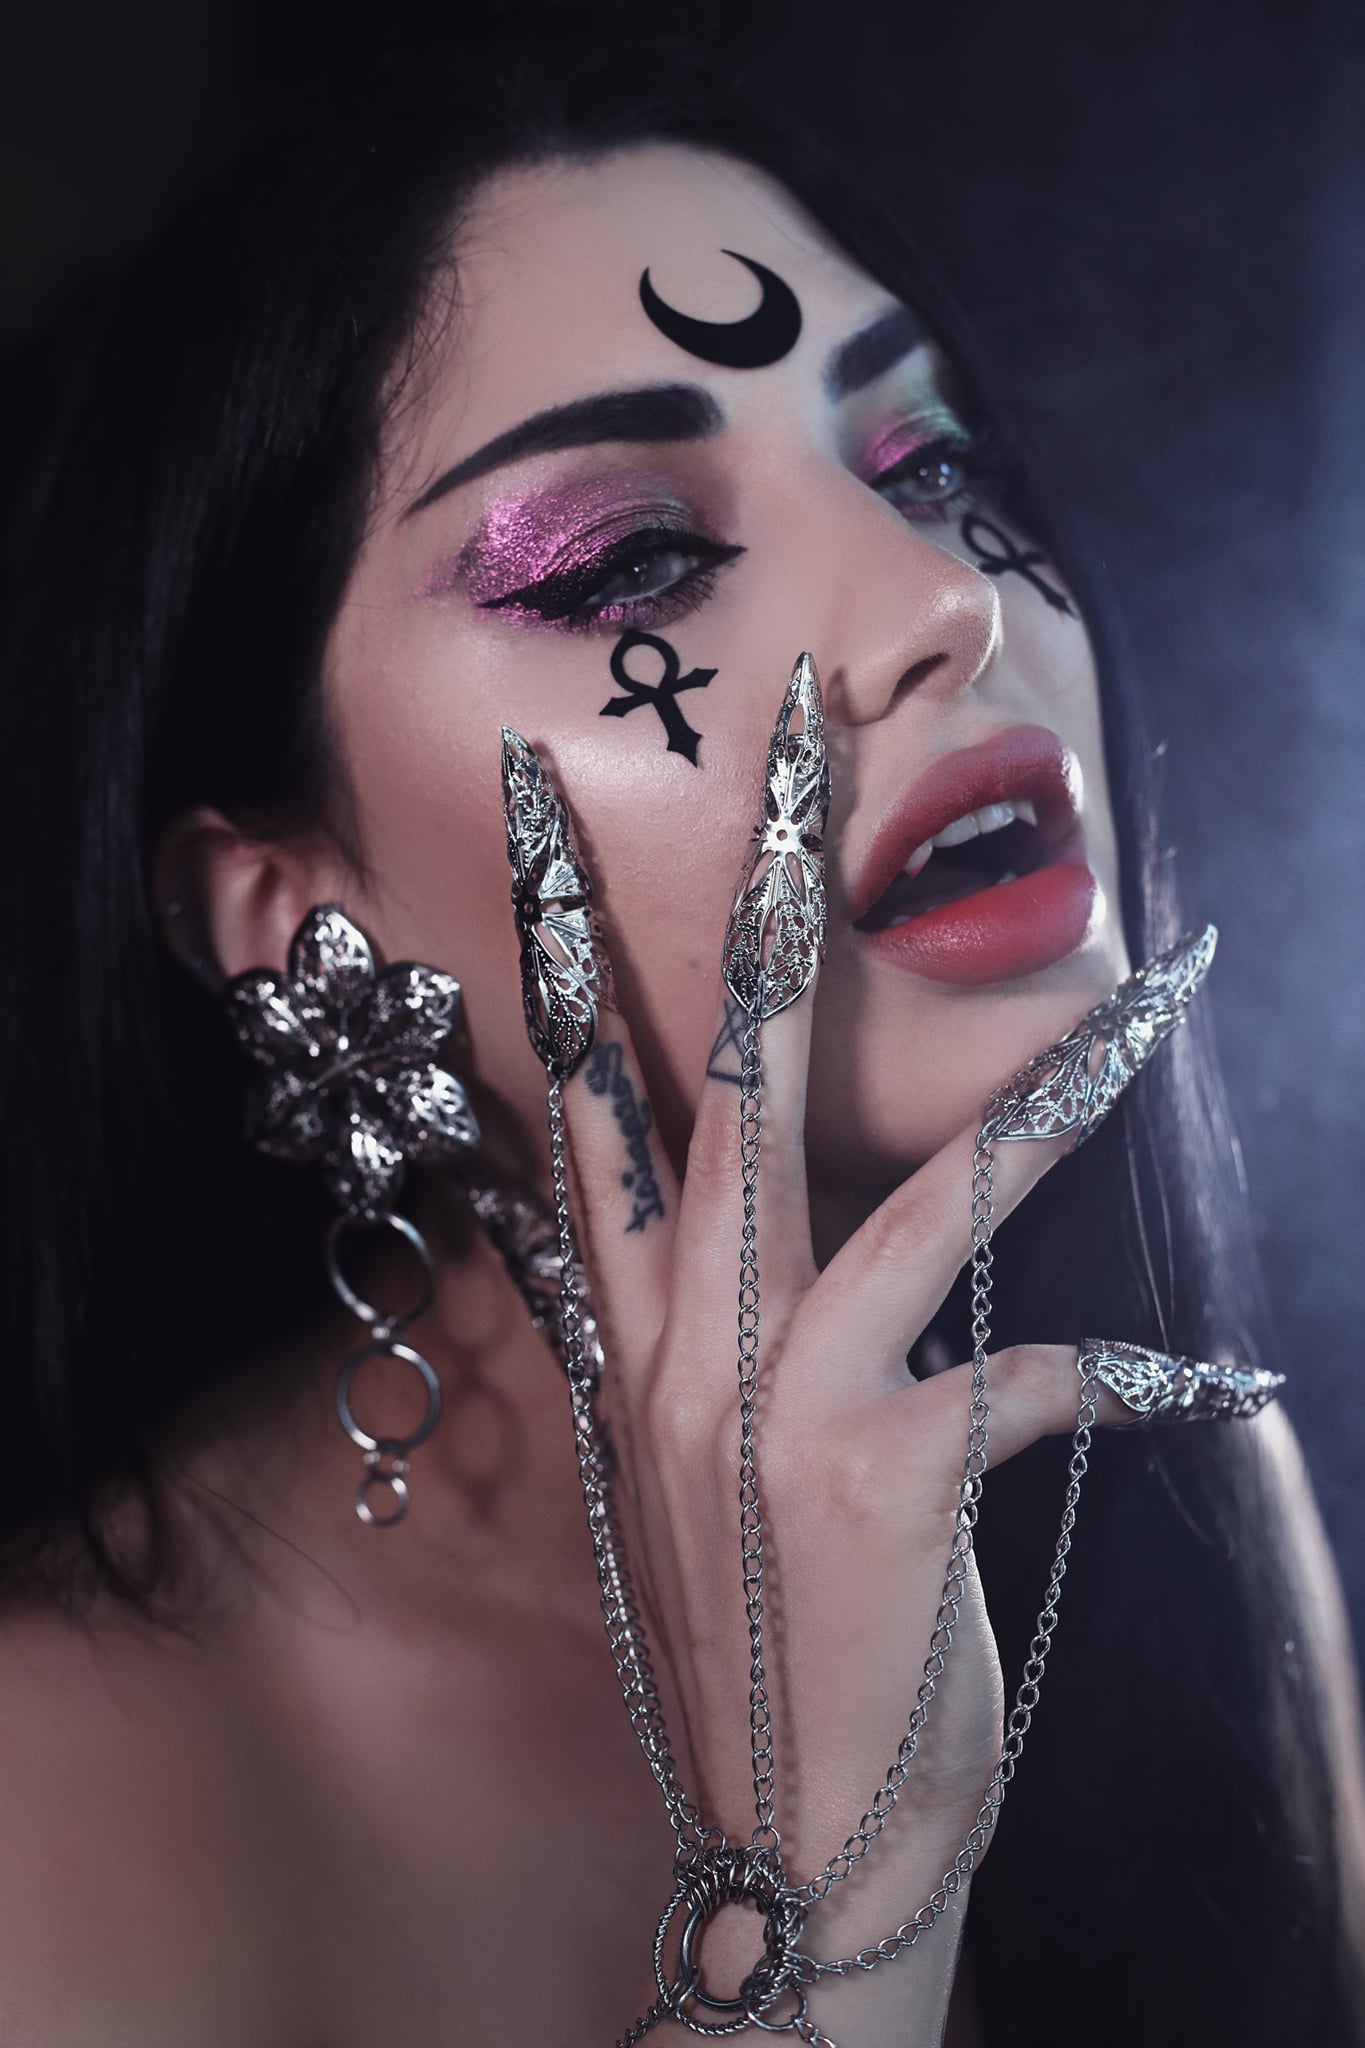 A captivating portrait featuring a model with bold makeup and symbolic tattoos, her hand adorned with a Myril Jewels hand chain bracelet with ornate claws. This neo-goth piece embodies the essence of Gothic-chic jewellery, perfect for Halloween and everyday wear by those who dare to stand out.